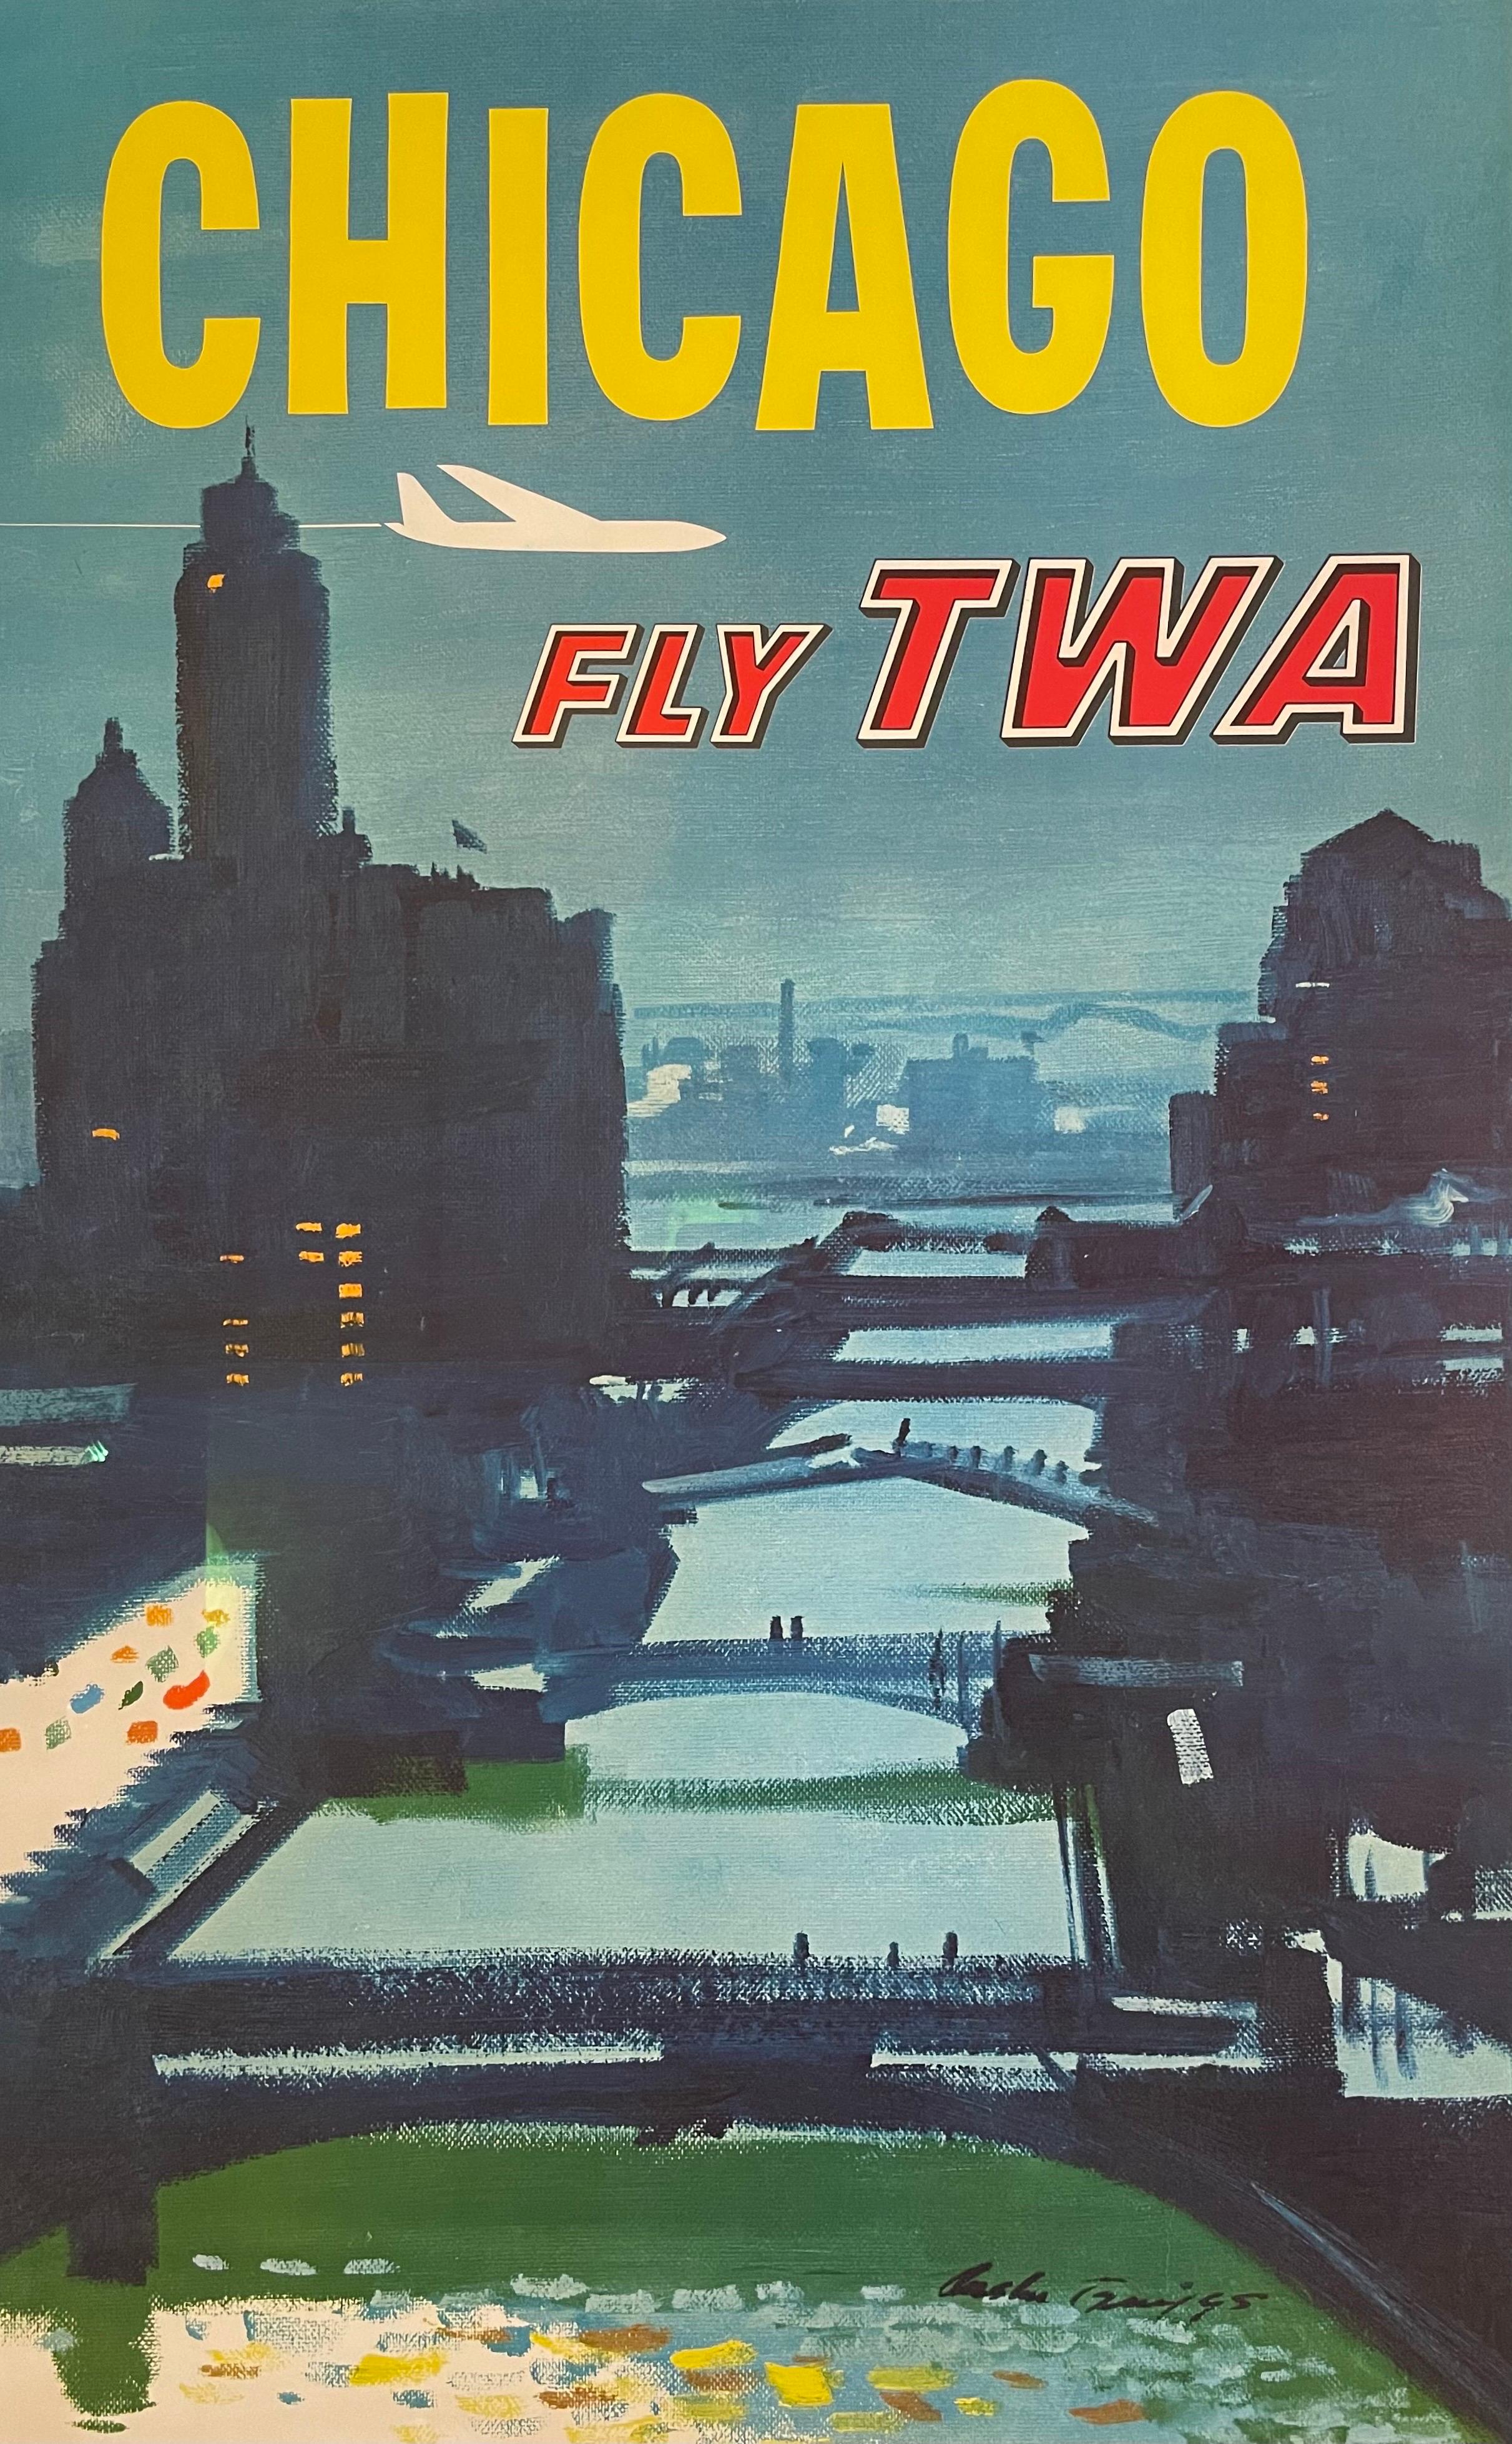 Fresh from the framers, this 1960’s travel poster for Trans World Airlines has been given the royal treatment. Linen-backed, museum glass, and a sharp black aluminum frame. Artwork done by American artist Austin Briggs, the cartoonist behind the